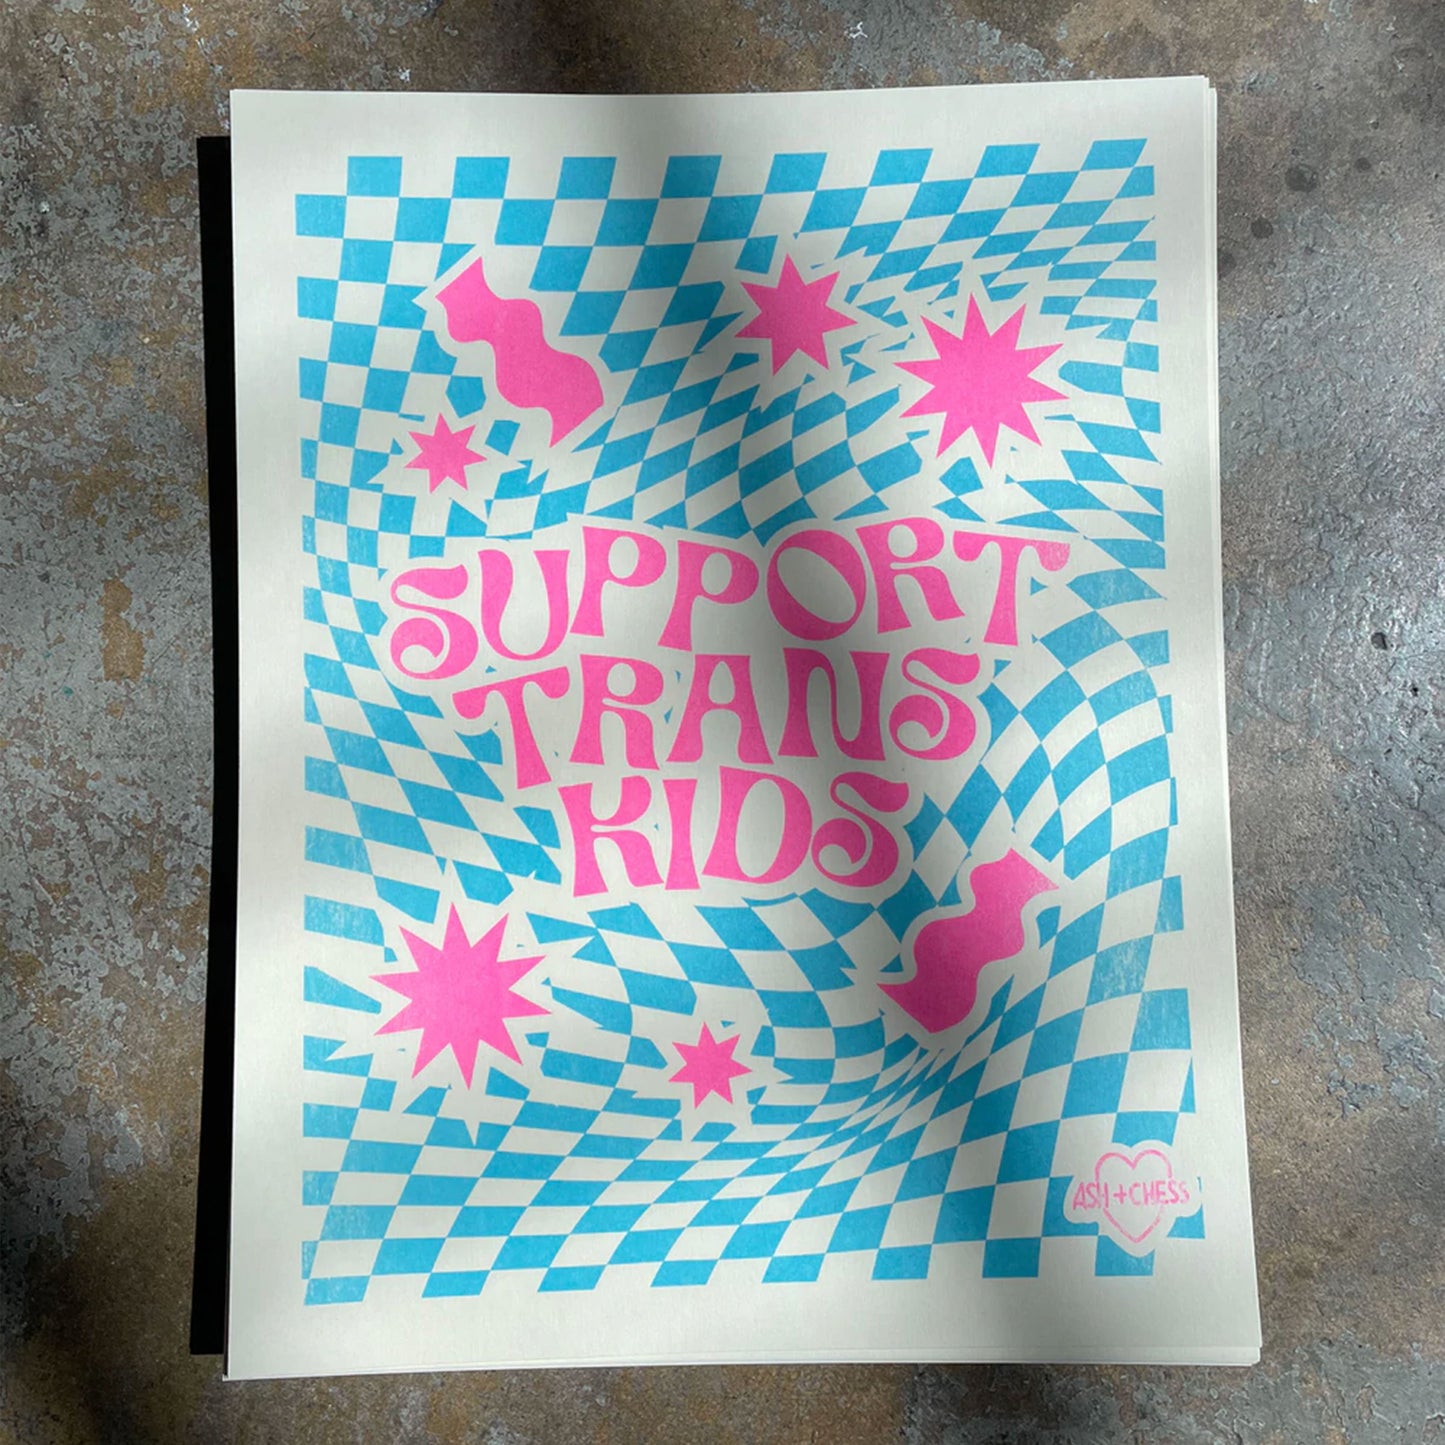 Ash + Chess: Support Trans Kids Riso Print